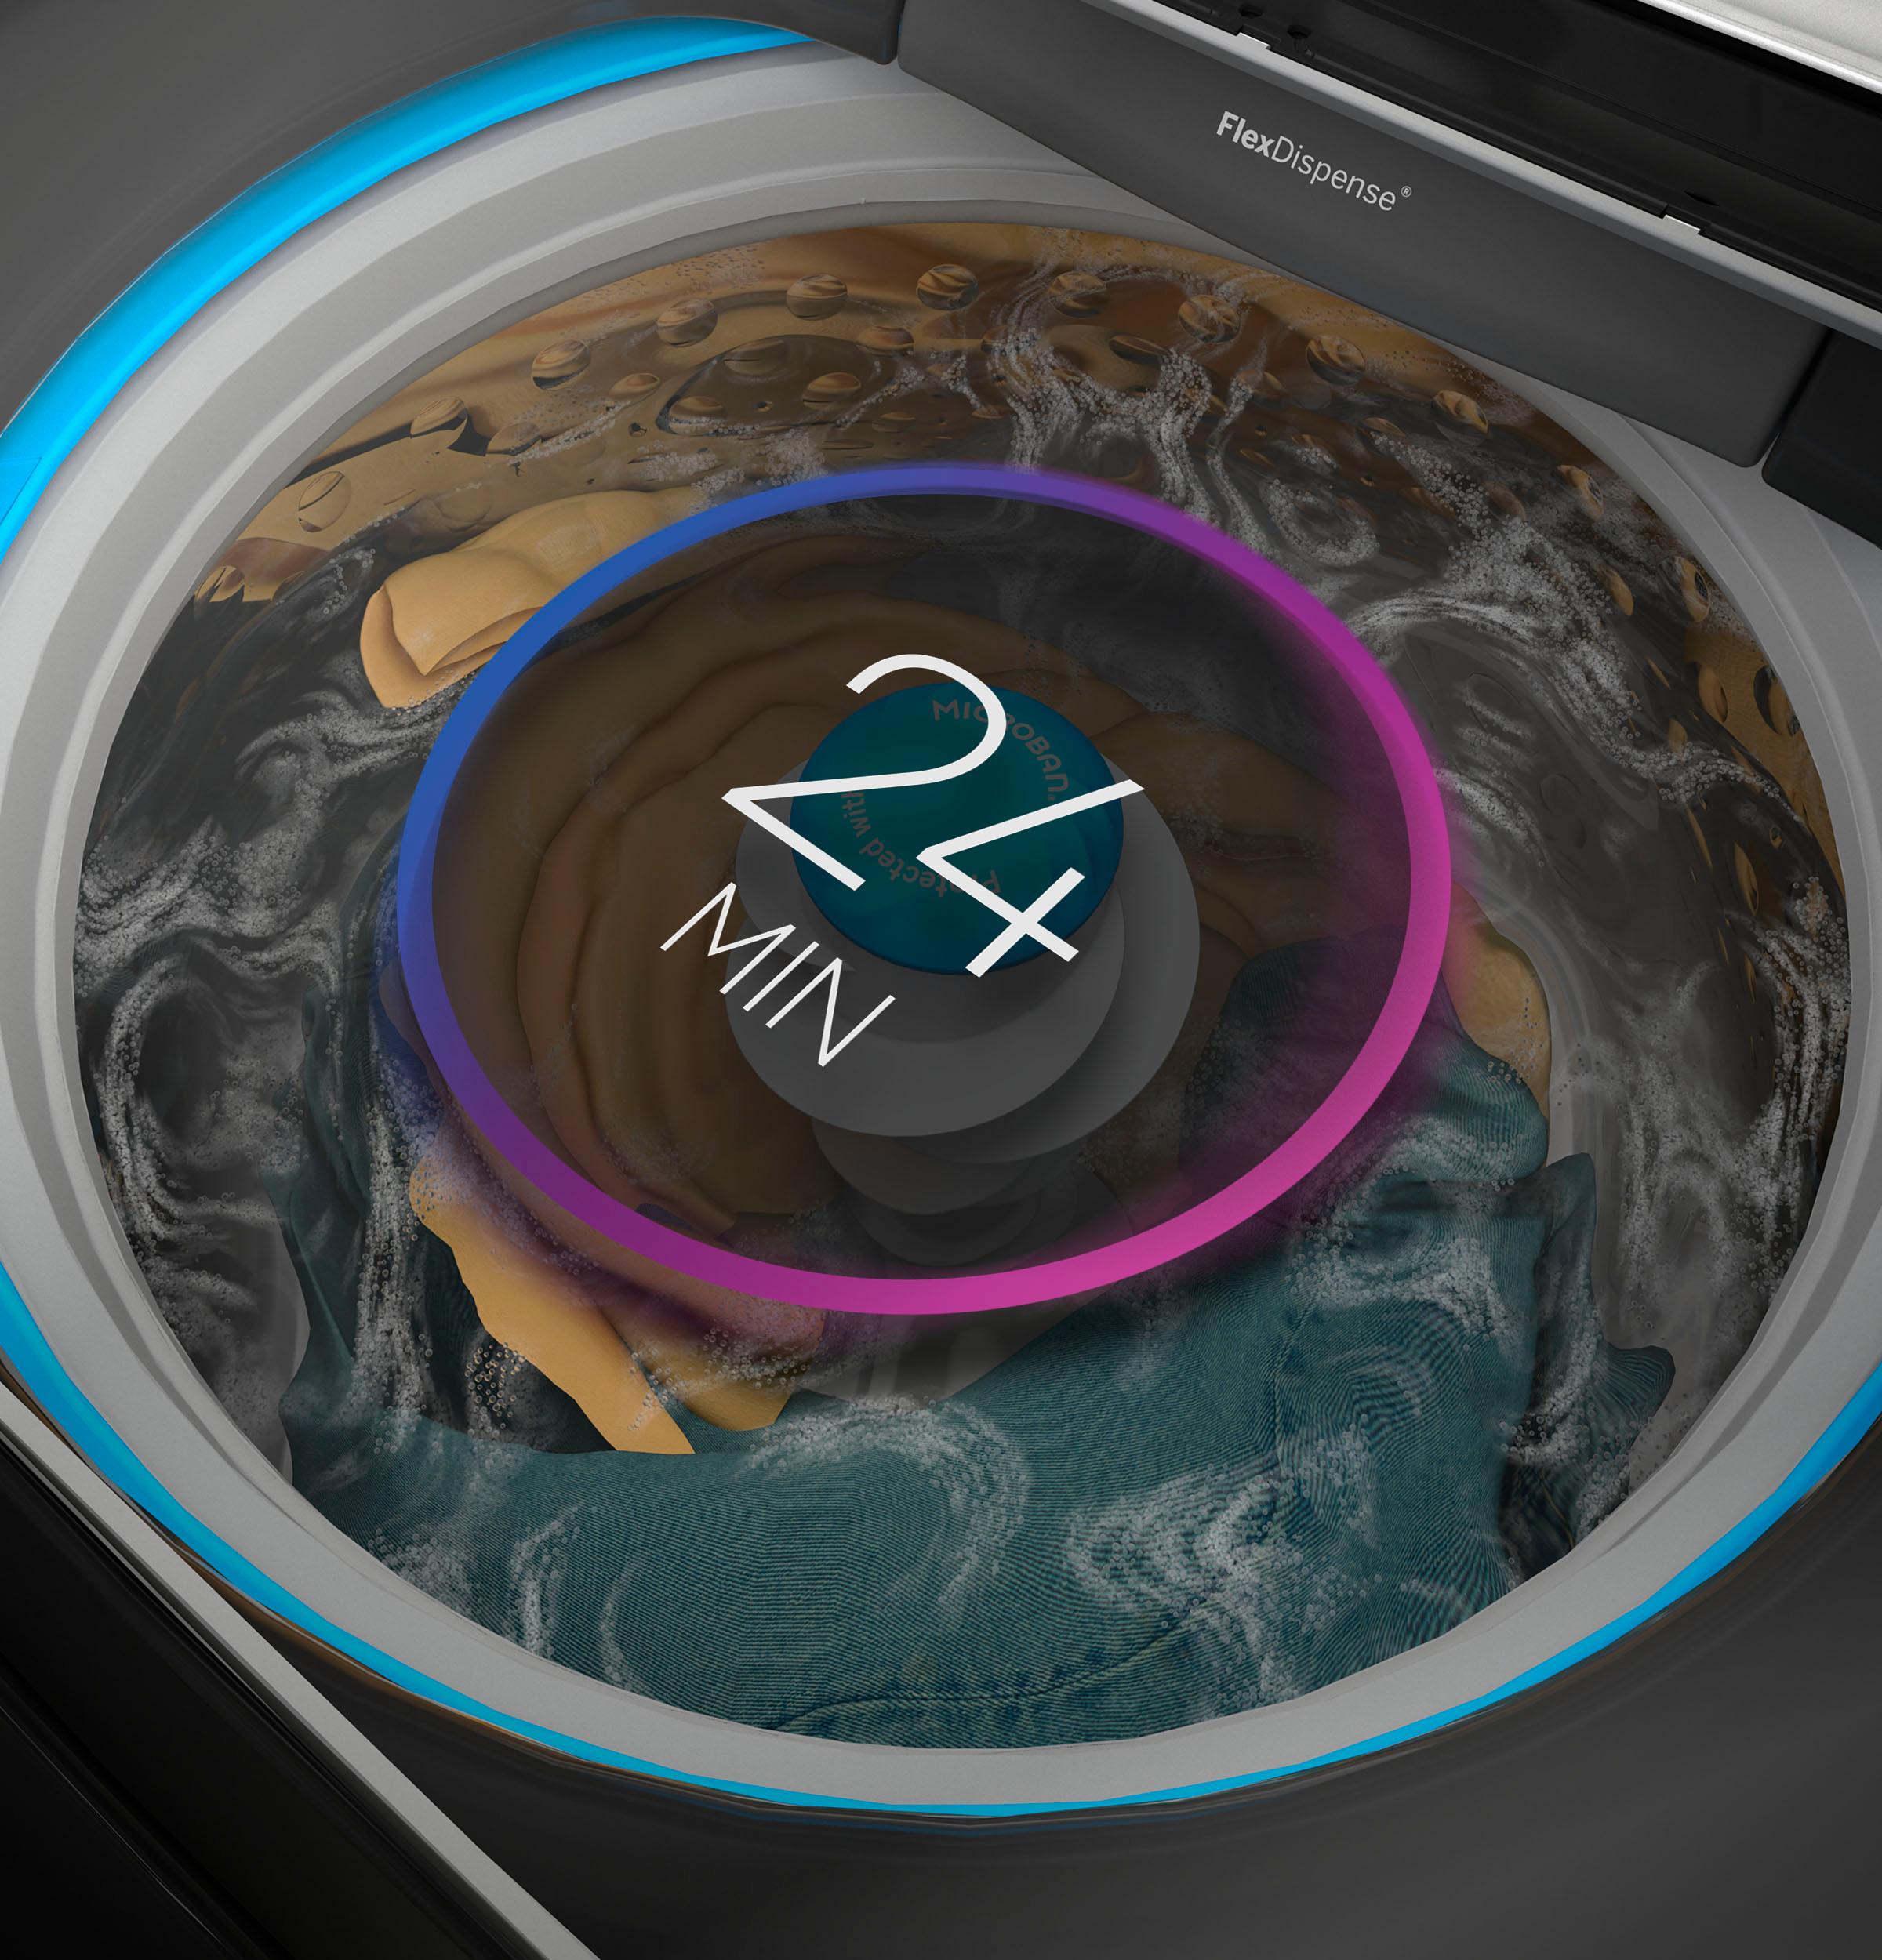 GE Profile™ ENERGY STAR® 5.0 cu. ft. Capacity Washer with Smarter Wash Technology and FlexDispense™